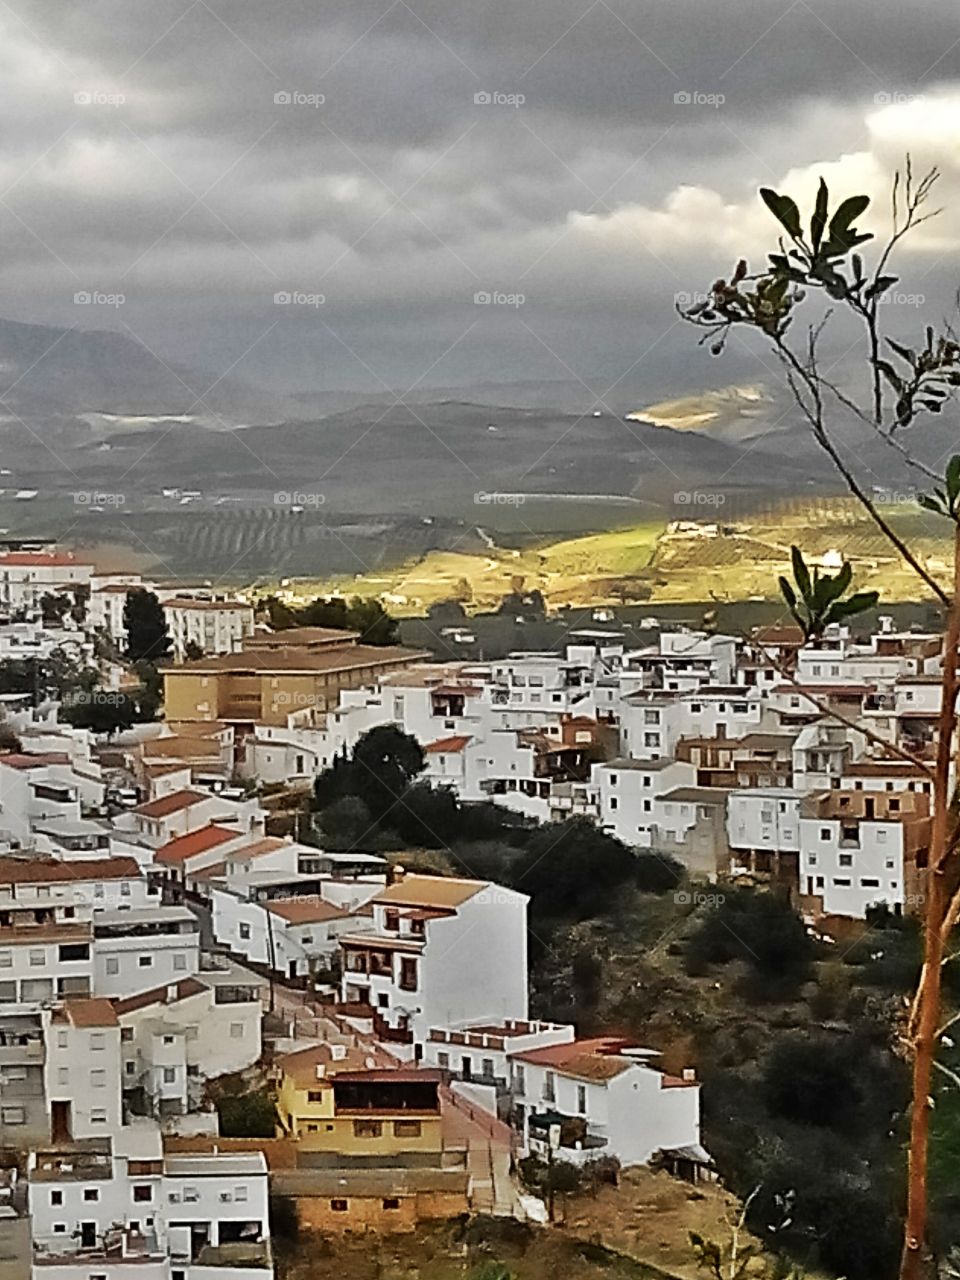 Views of Andalucia, Spain